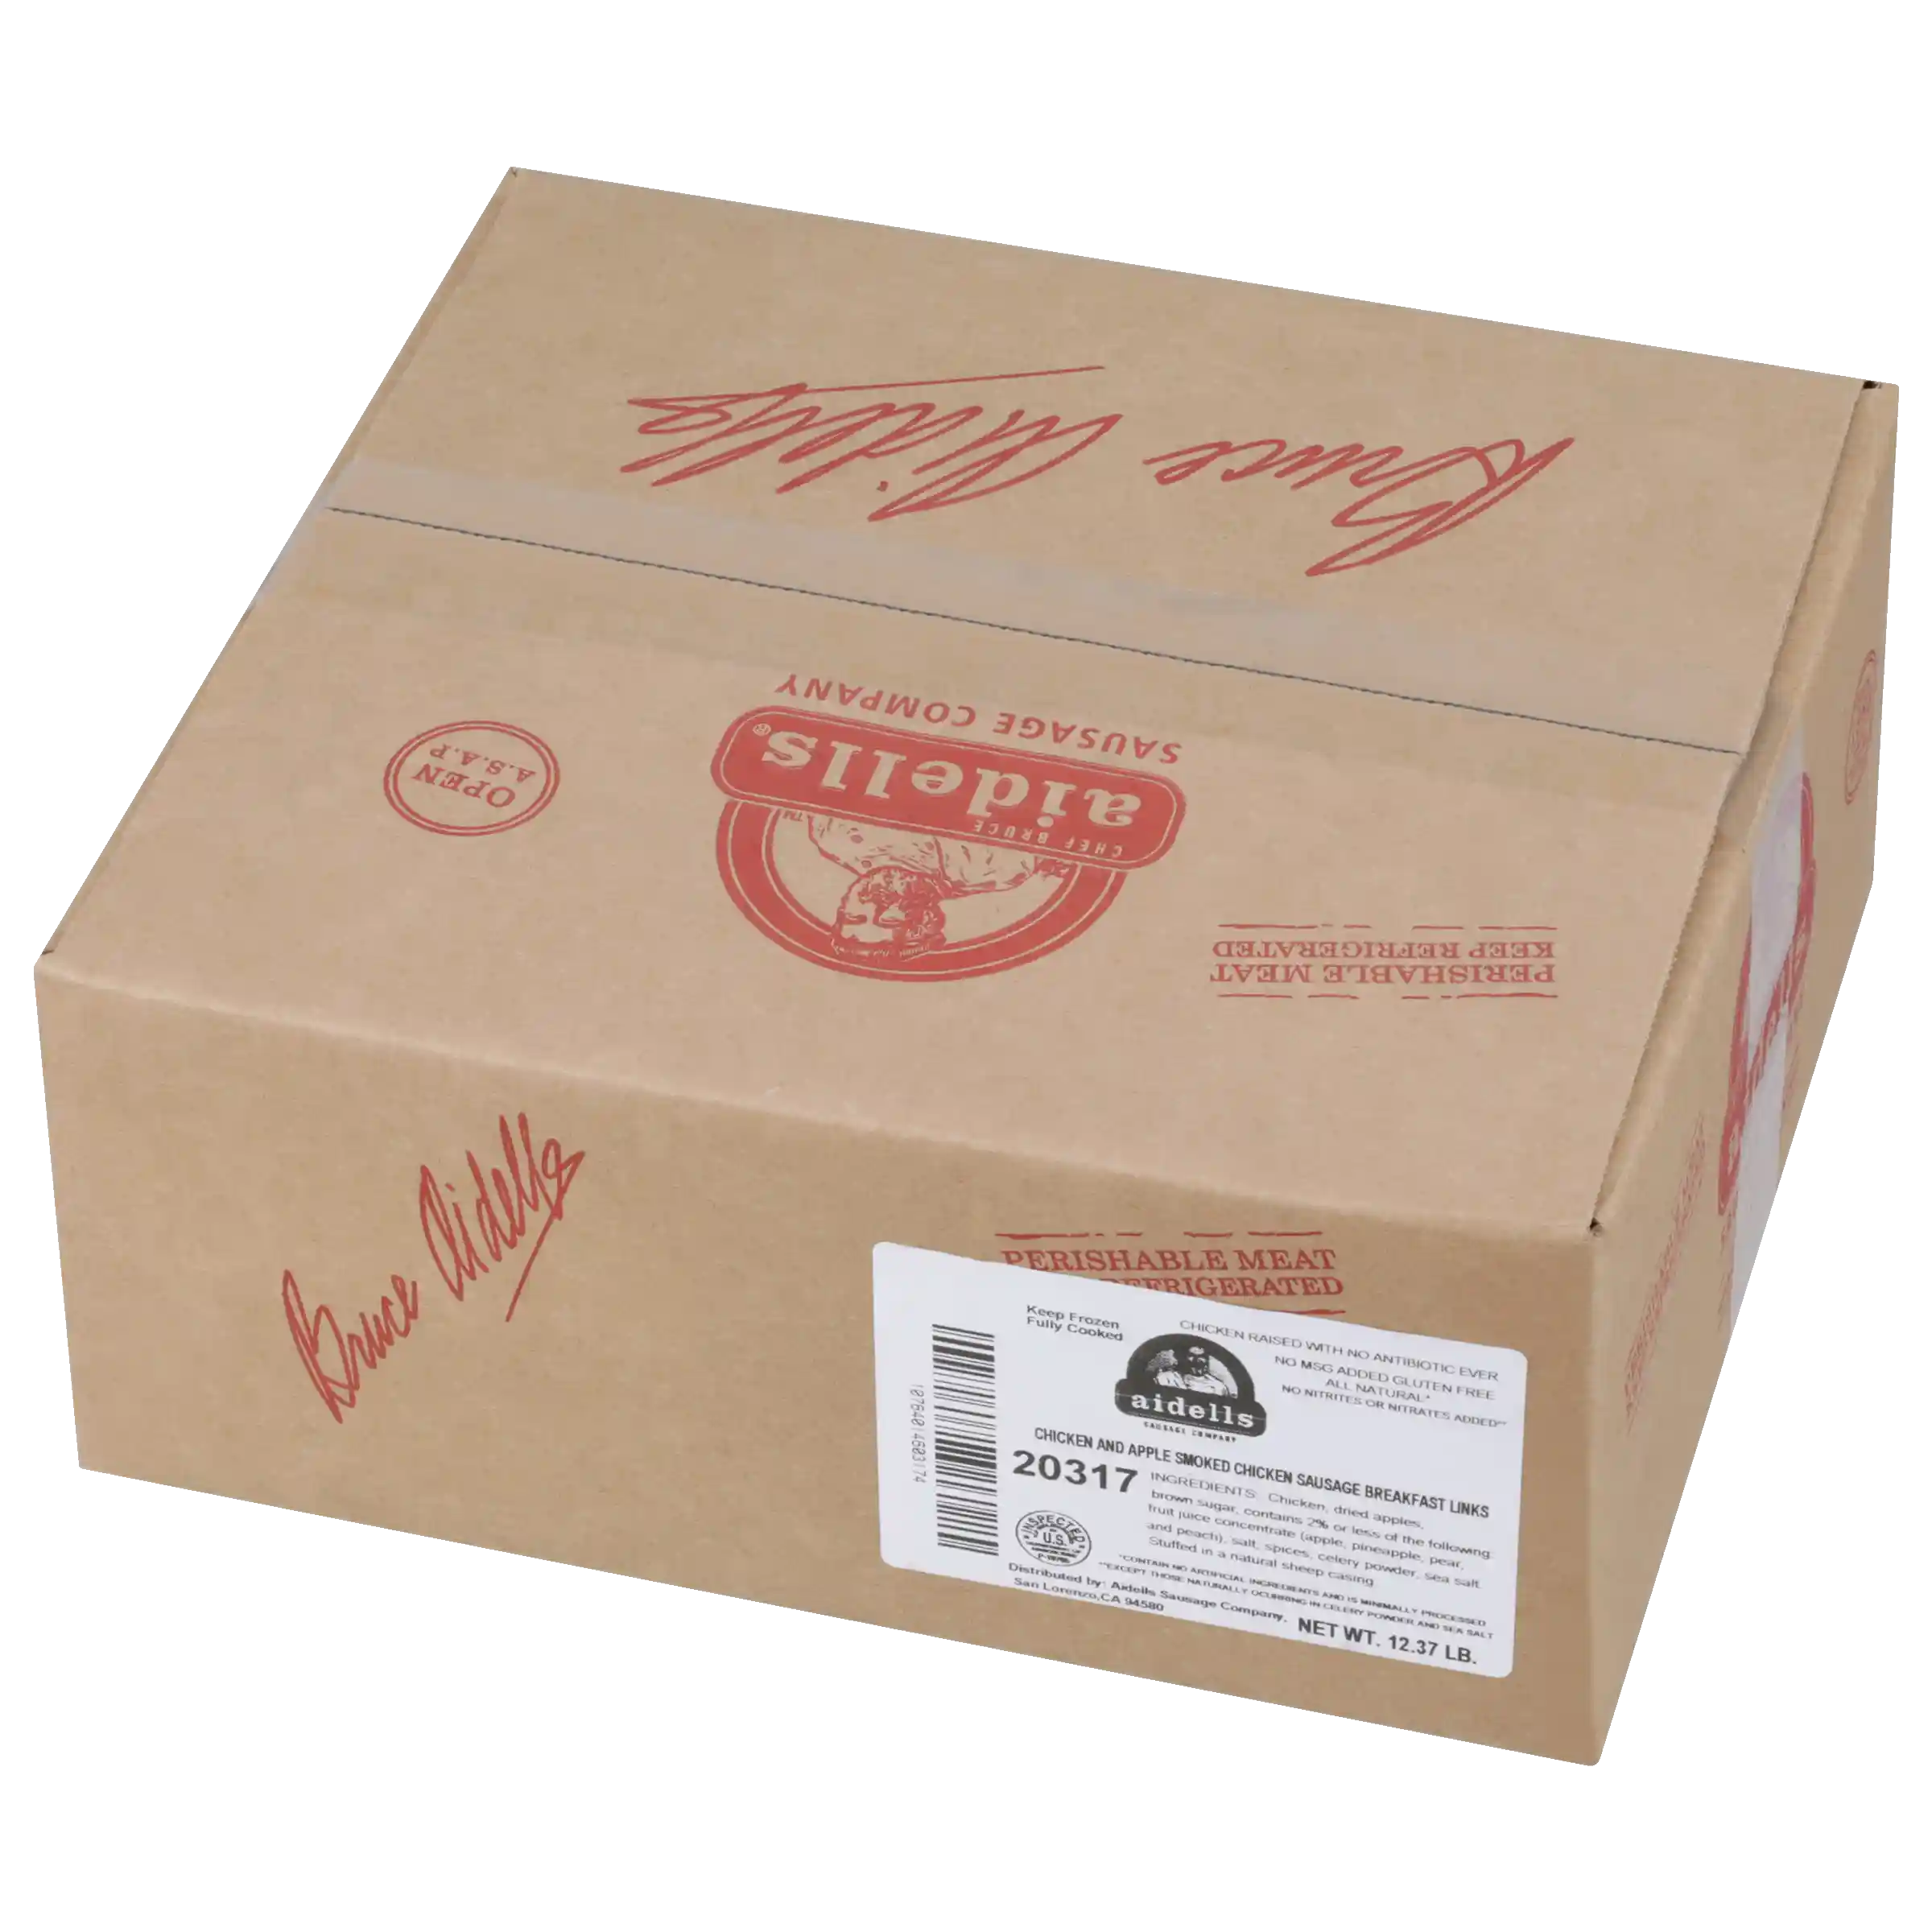 Aidells® Fully Cooked Smoked Chicken and Apple Chicken Sausage Breakfast Links_image_41